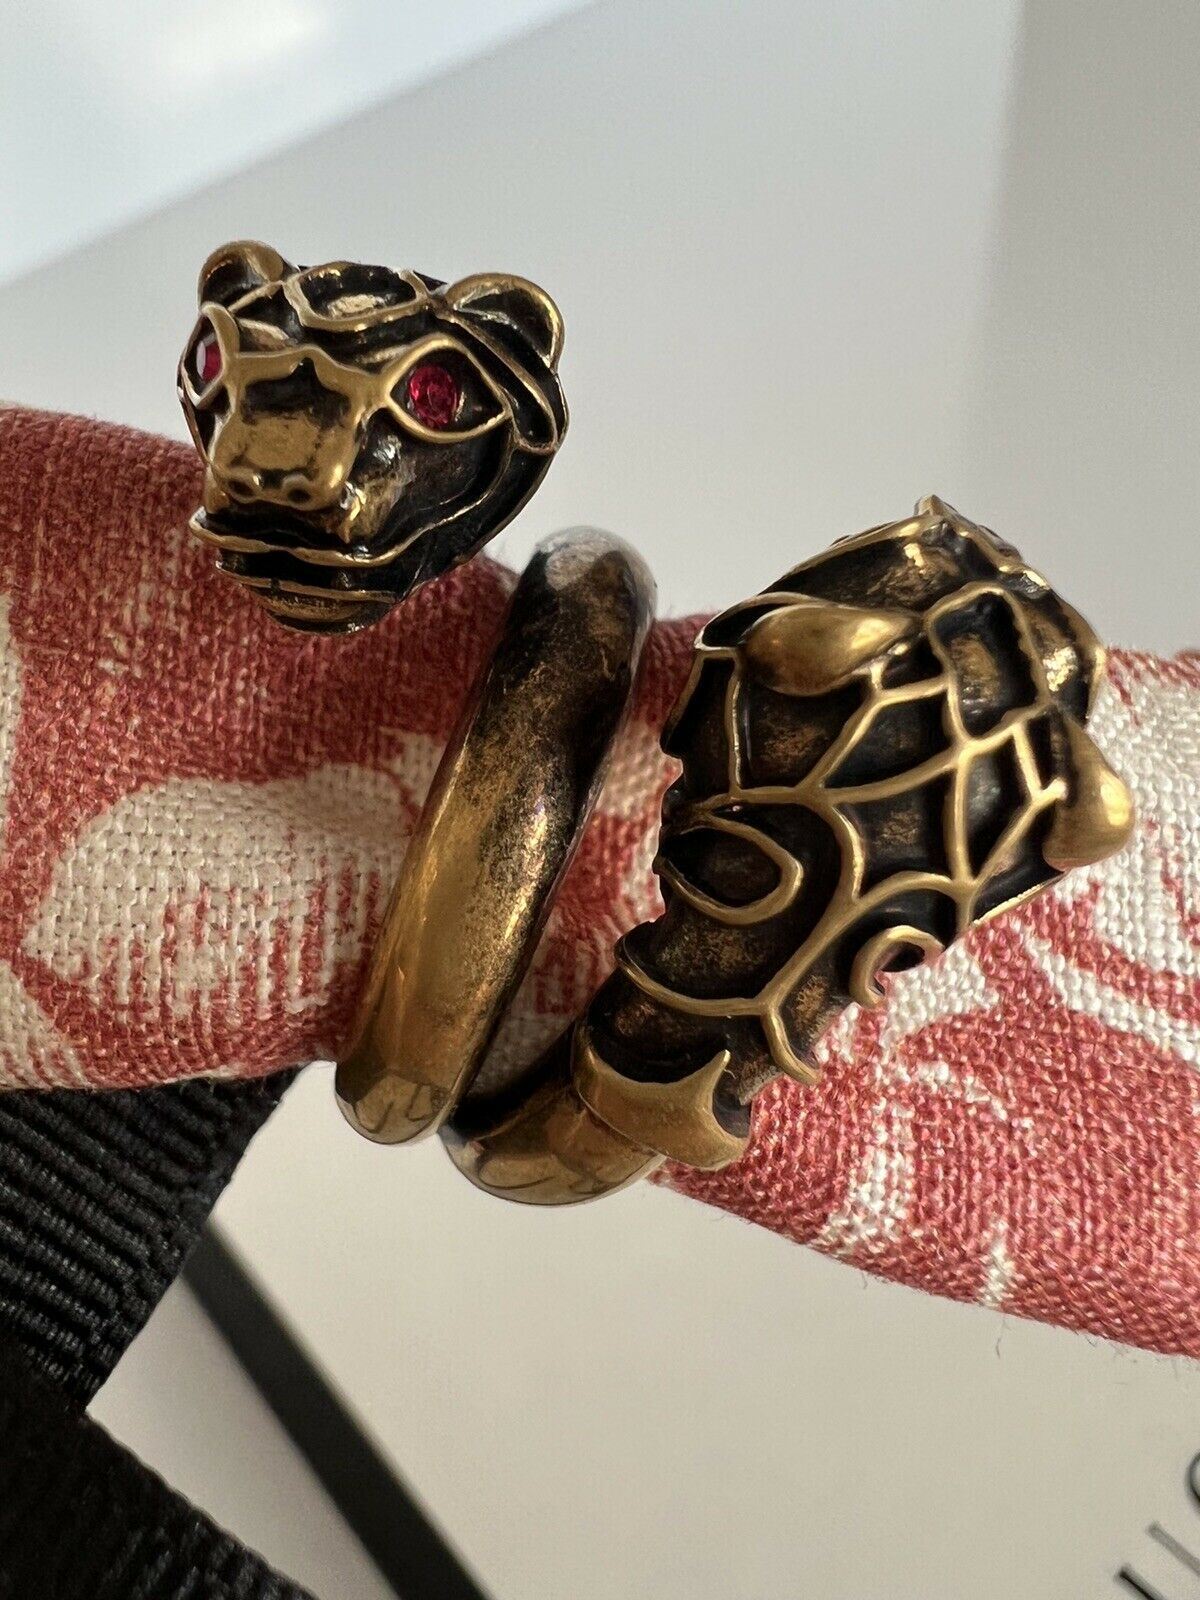 New Authentic GUCCI Red Crystal Gucci Tiger Head Ring Size 15 (7 1/4 US) Italy